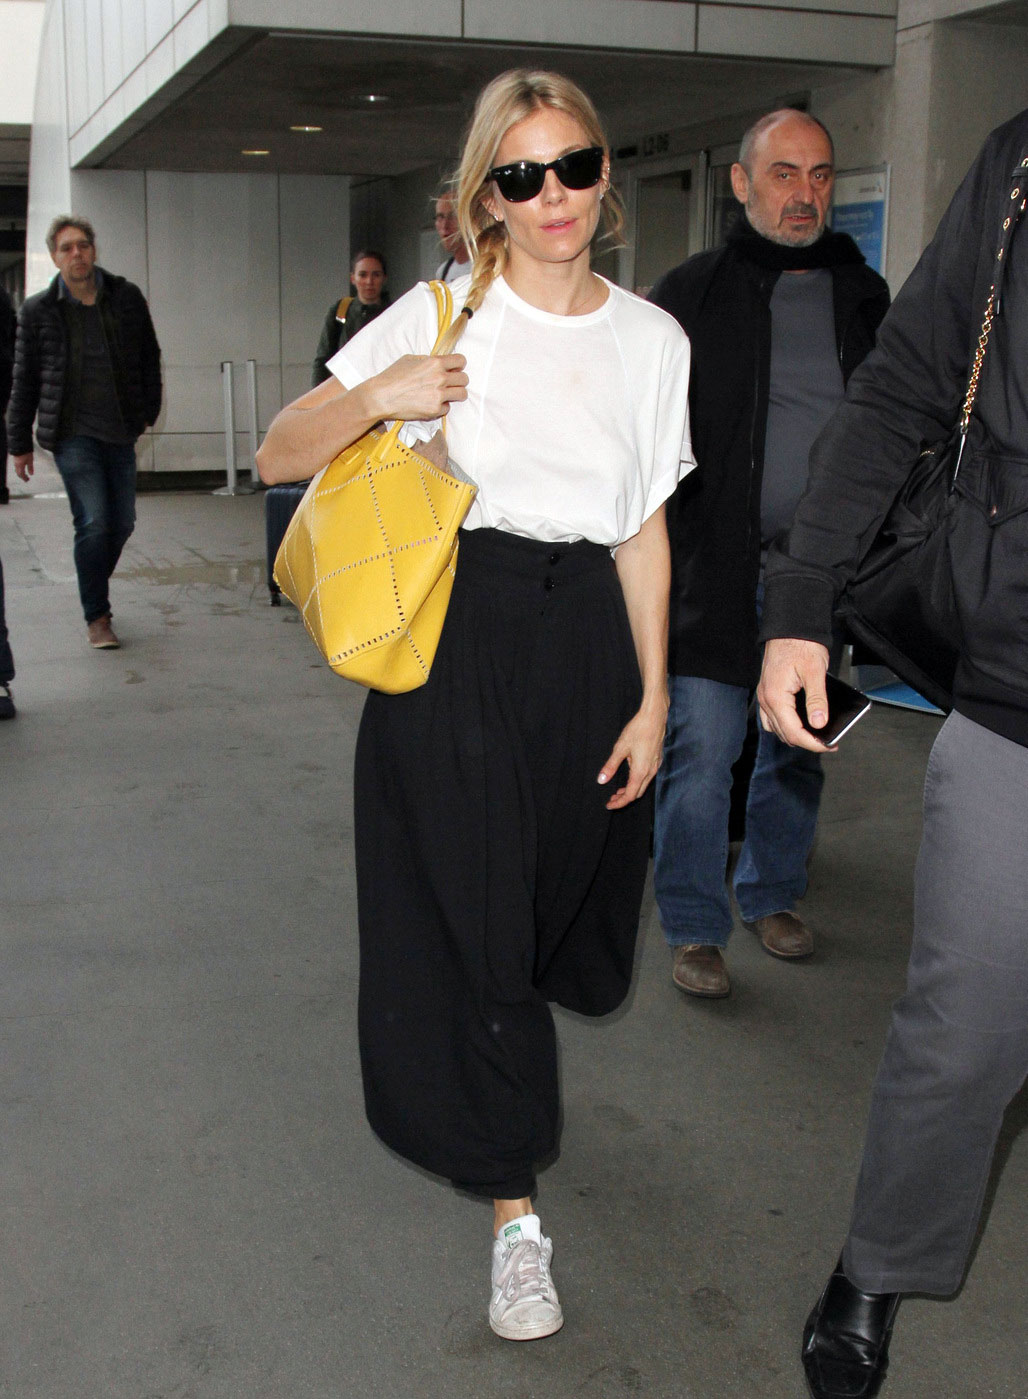 See how to recreate Sienna Miller's eclectic airport style with pieces starting at just $15.